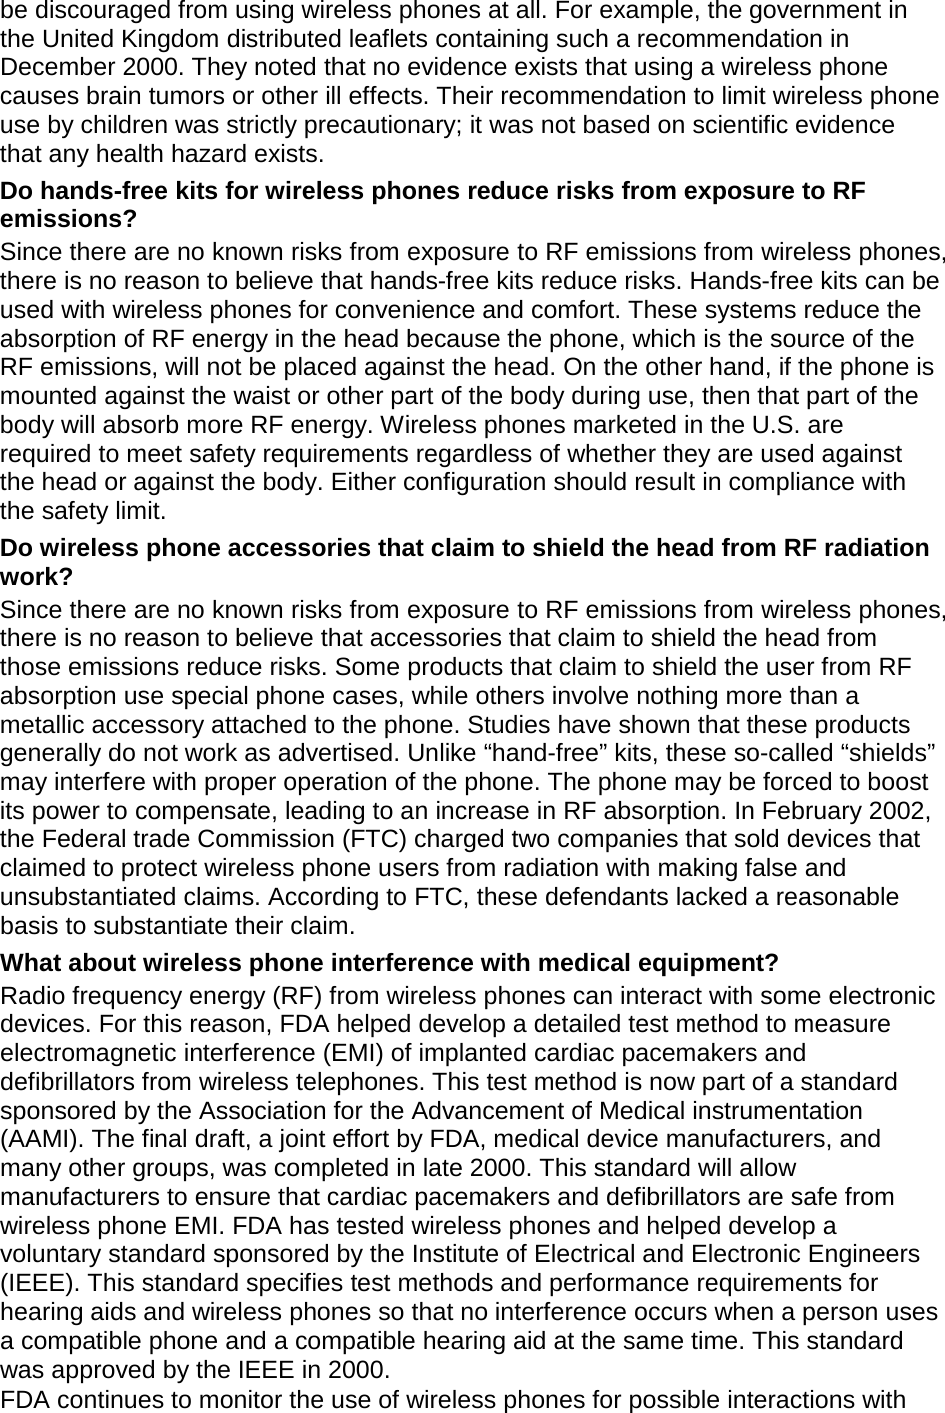 be discouraged from using wireless phones at all. For example, the government in the United Kingdom distributed leaflets containing such a recommendation in December 2000. They noted that no evidence exists that using a wireless phone causes brain tumors or other ill effects. Their recommendation to limit wireless phone use by children was strictly precautionary; it was not based on scientific evidence that any health hazard exists.   Do hands-free kits for wireless phones reduce risks from exposure to RF emissions? Since there are no known risks from exposure to RF emissions from wireless phones, there is no reason to believe that hands-free kits reduce risks. Hands-free kits can be used with wireless phones for convenience and comfort. These systems reduce the absorption of RF energy in the head because the phone, which is the source of the RF emissions, will not be placed against the head. On the other hand, if the phone is mounted against the waist or other part of the body during use, then that part of the body will absorb more RF energy. Wireless phones marketed in the U.S. are required to meet safety requirements regardless of whether they are used against the head or against the body. Either configuration should result in compliance with the safety limit. Do wireless phone accessories that claim to shield the head from RF radiation work? Since there are no known risks from exposure to RF emissions from wireless phones, there is no reason to believe that accessories that claim to shield the head from those emissions reduce risks. Some products that claim to shield the user from RF absorption use special phone cases, while others involve nothing more than a metallic accessory attached to the phone. Studies have shown that these products generally do not work as advertised. Unlike “hand-free” kits, these so-called “shields” may interfere with proper operation of the phone. The phone may be forced to boost its power to compensate, leading to an increase in RF absorption. In February 2002, the Federal trade Commission (FTC) charged two companies that sold devices that claimed to protect wireless phone users from radiation with making false and unsubstantiated claims. According to FTC, these defendants lacked a reasonable basis to substantiate their claim. What about wireless phone interference with medical equipment? Radio frequency energy (RF) from wireless phones can interact with some electronic devices. For this reason, FDA helped develop a detailed test method to measure electromagnetic interference (EMI) of implanted cardiac pacemakers and defibrillators from wireless telephones. This test method is now part of a standard sponsored by the Association for the Advancement of Medical instrumentation (AAMI). The final draft, a joint effort by FDA, medical device manufacturers, and many other groups, was completed in late 2000. This standard will allow manufacturers to ensure that cardiac pacemakers and defibrillators are safe from wireless phone EMI. FDA has tested wireless phones and helped develop a voluntary standard sponsored by the Institute of Electrical and Electronic Engineers (IEEE). This standard specifies test methods and performance requirements for hearing aids and wireless phones so that no interference occurs when a person uses a compatible phone and a compatible hearing aid at the same time. This standard was approved by the IEEE in 2000. FDA continues to monitor the use of wireless phones for possible interactions with 